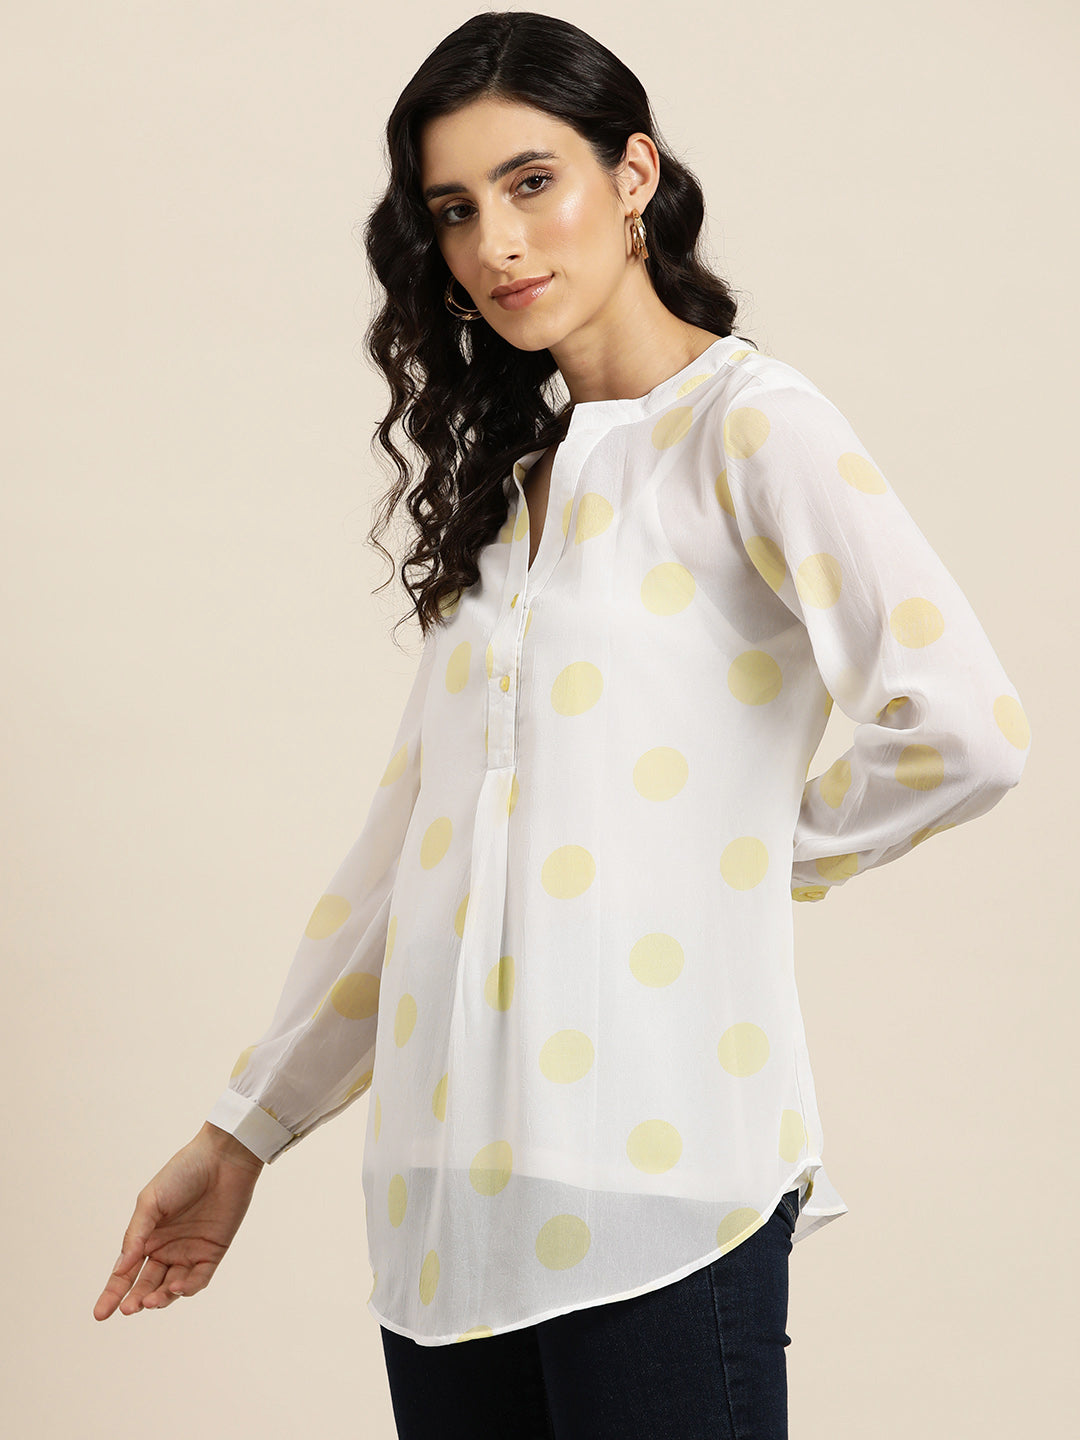 White and yellow polka georgette half placket shirt with full sleeves